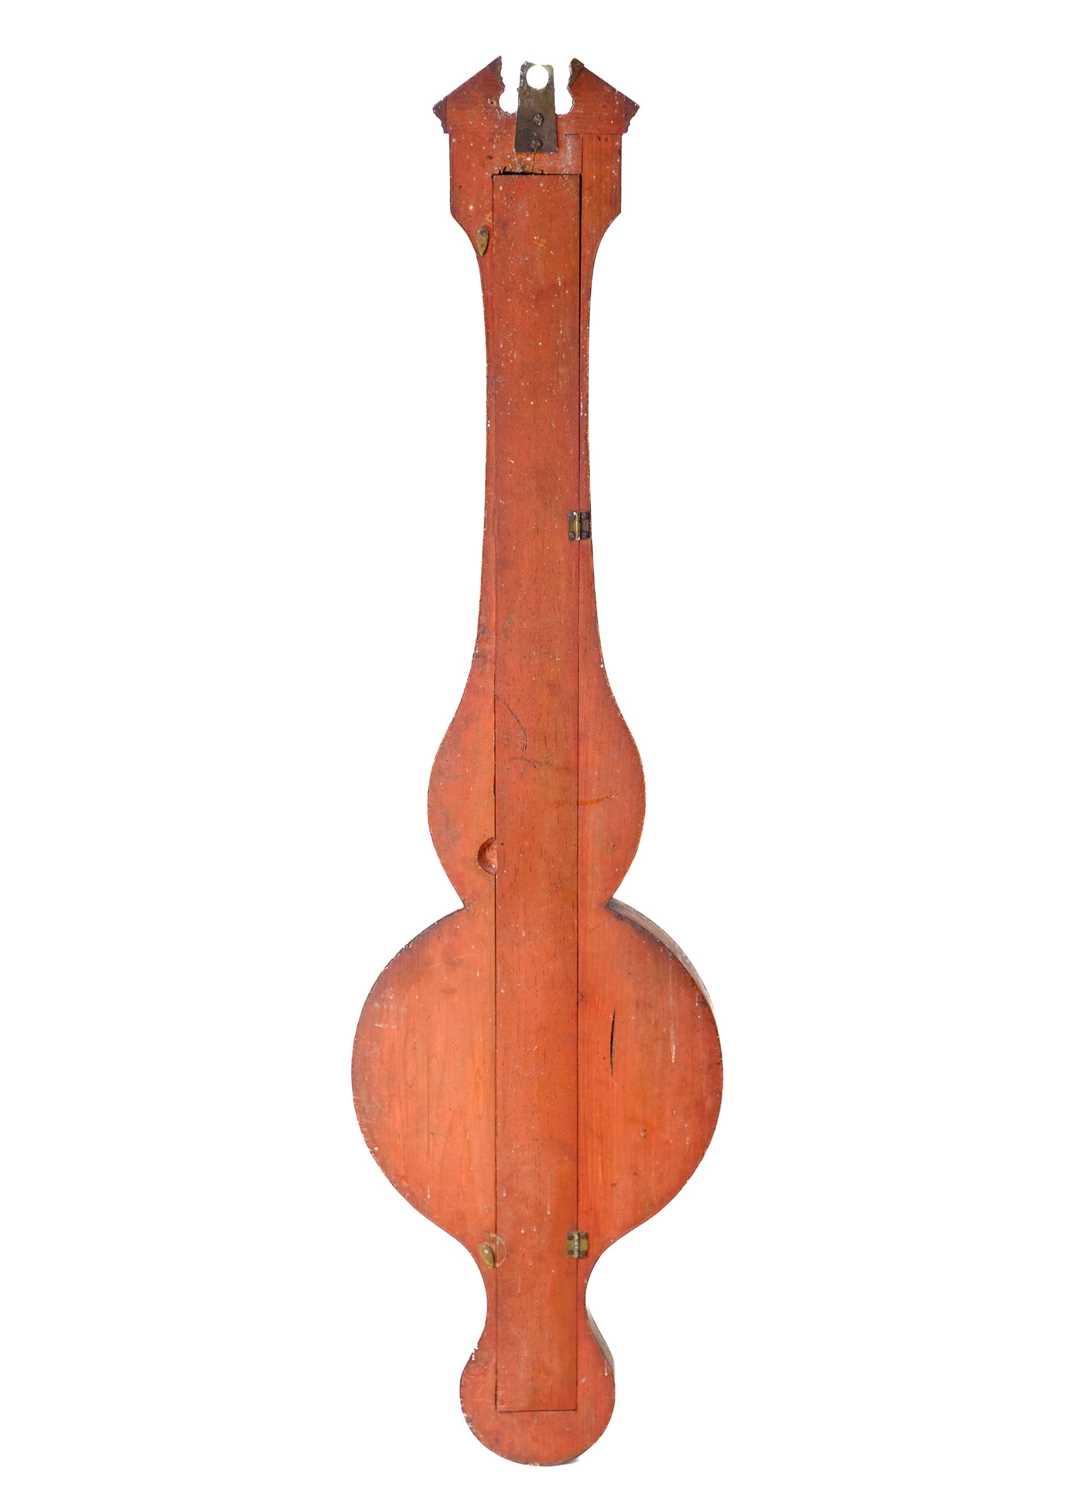 A 19th century mahogany barometer/thermometer by Cetti & Co. of London. - Image 2 of 7